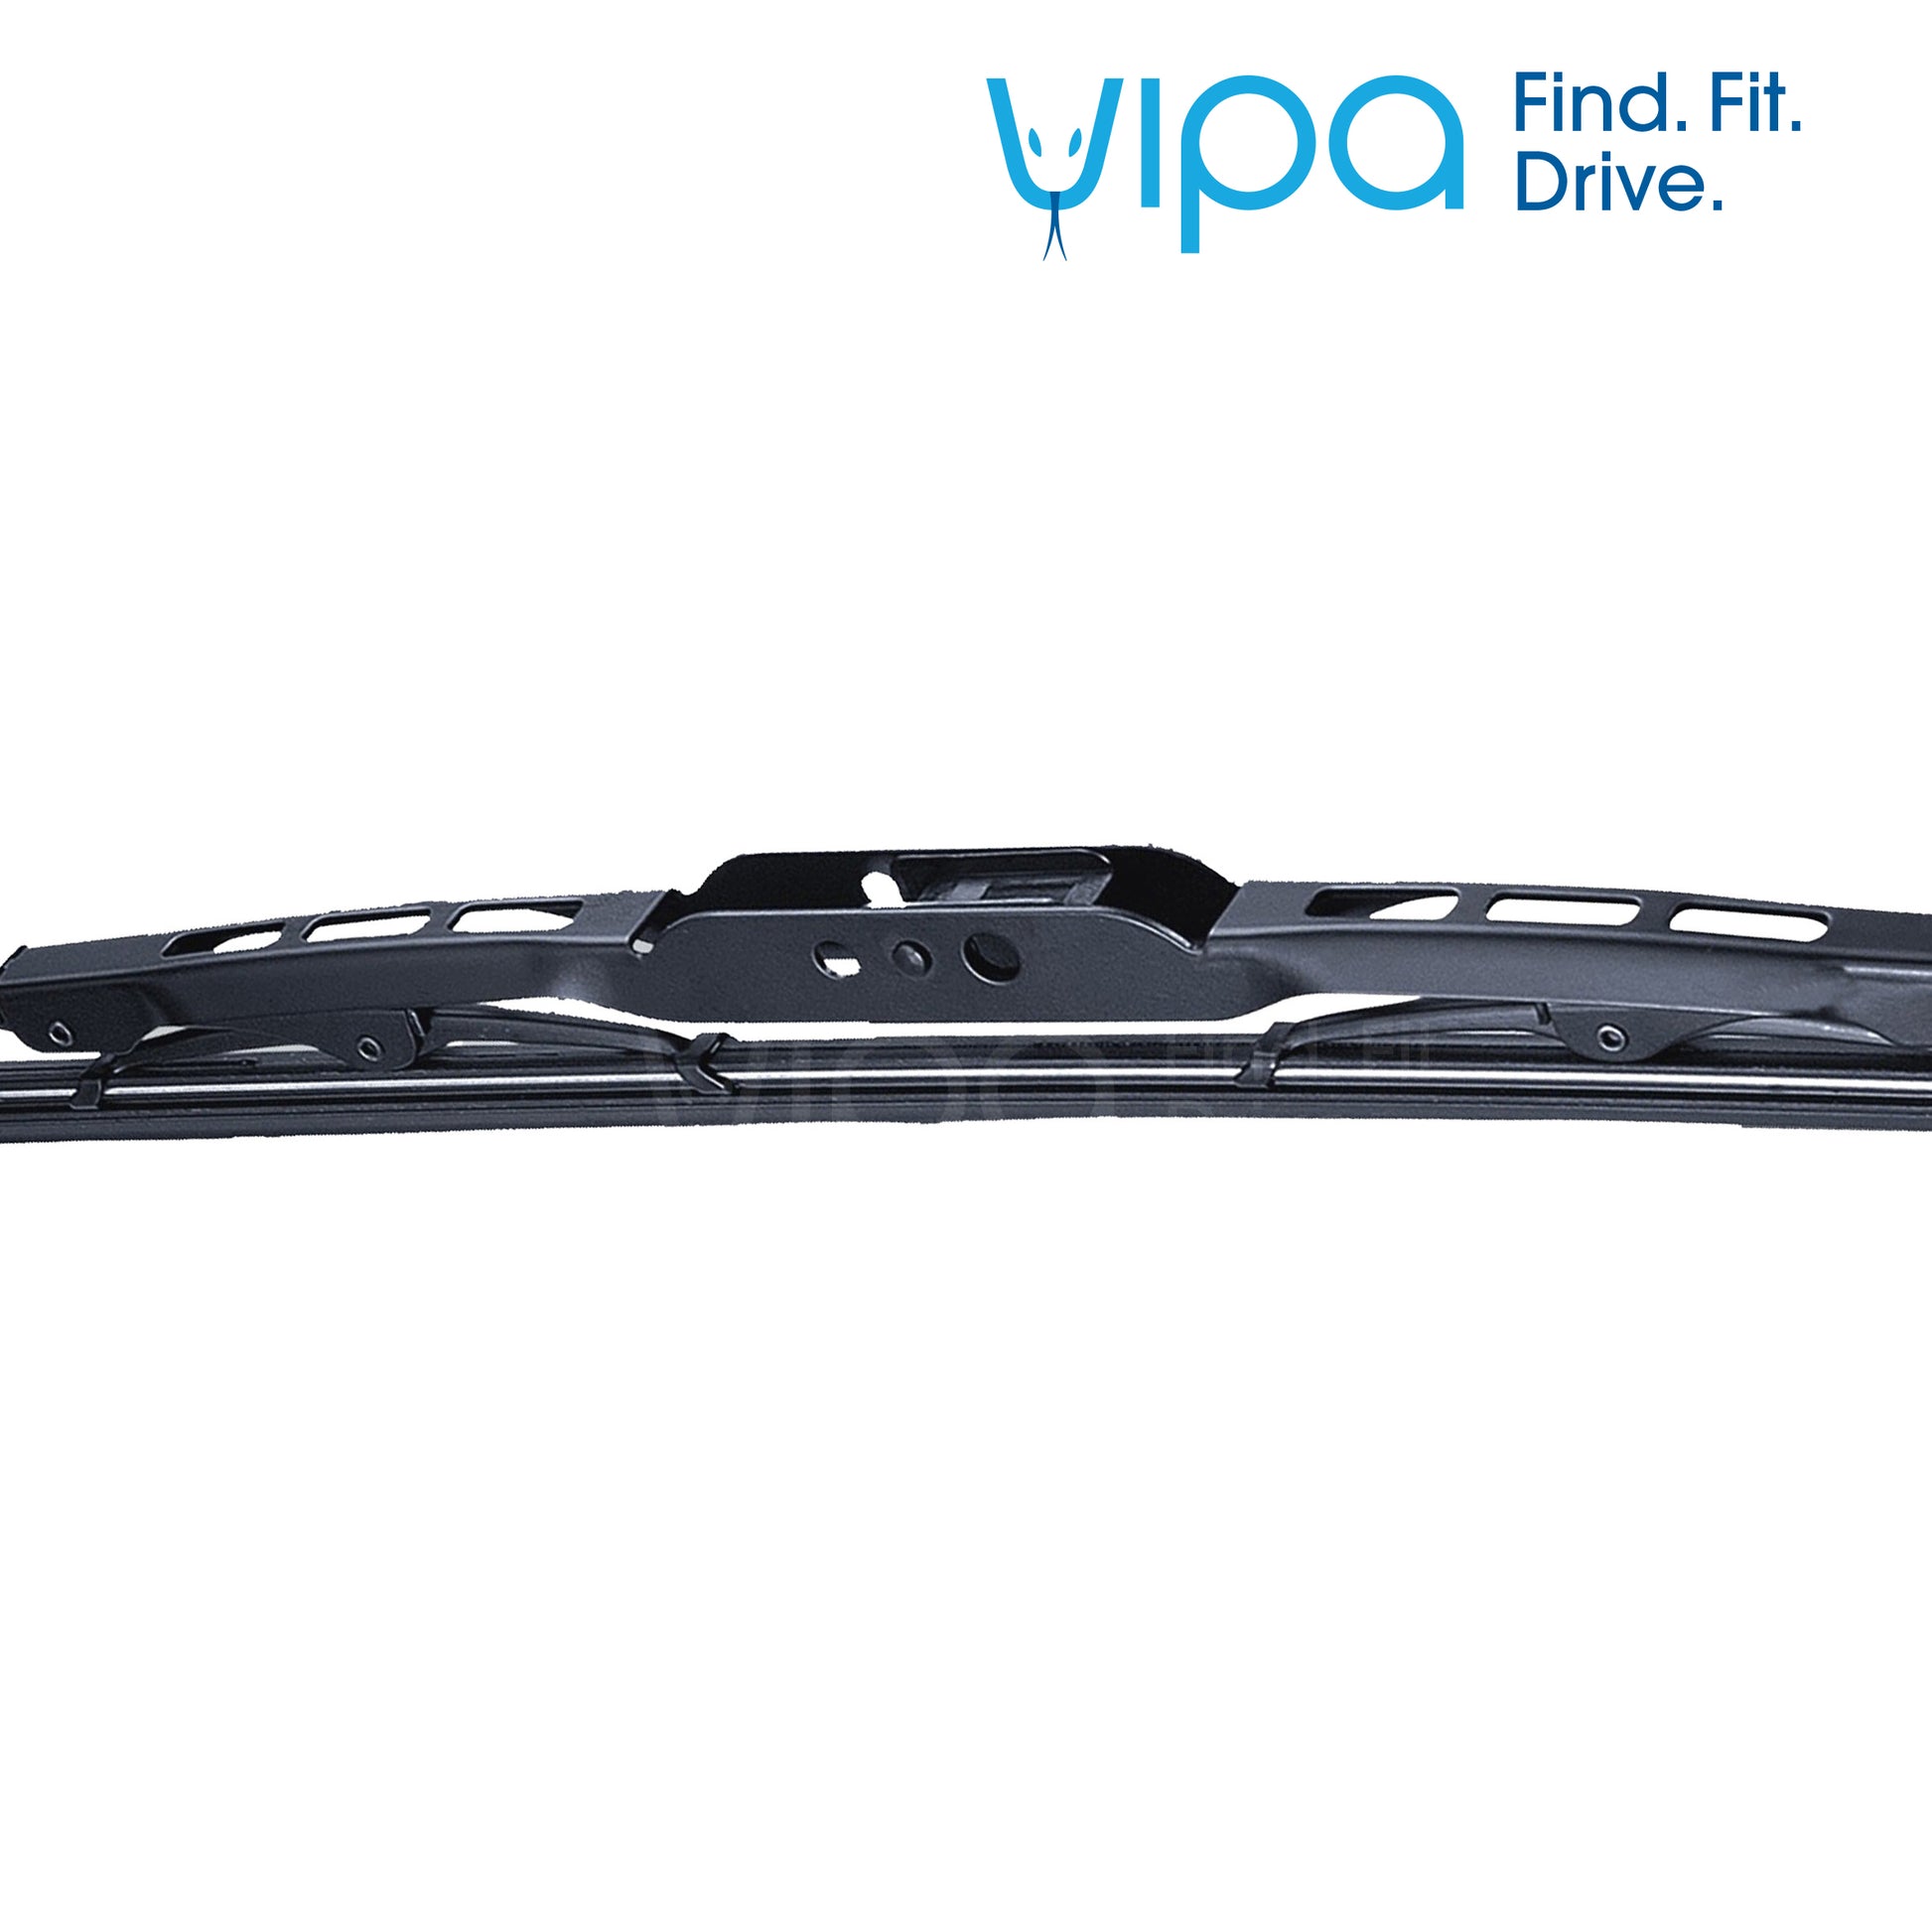 LAND ROVER RANGE ROVER SUV Aug 1981 to Apr 1994 Wiper Blade Kit